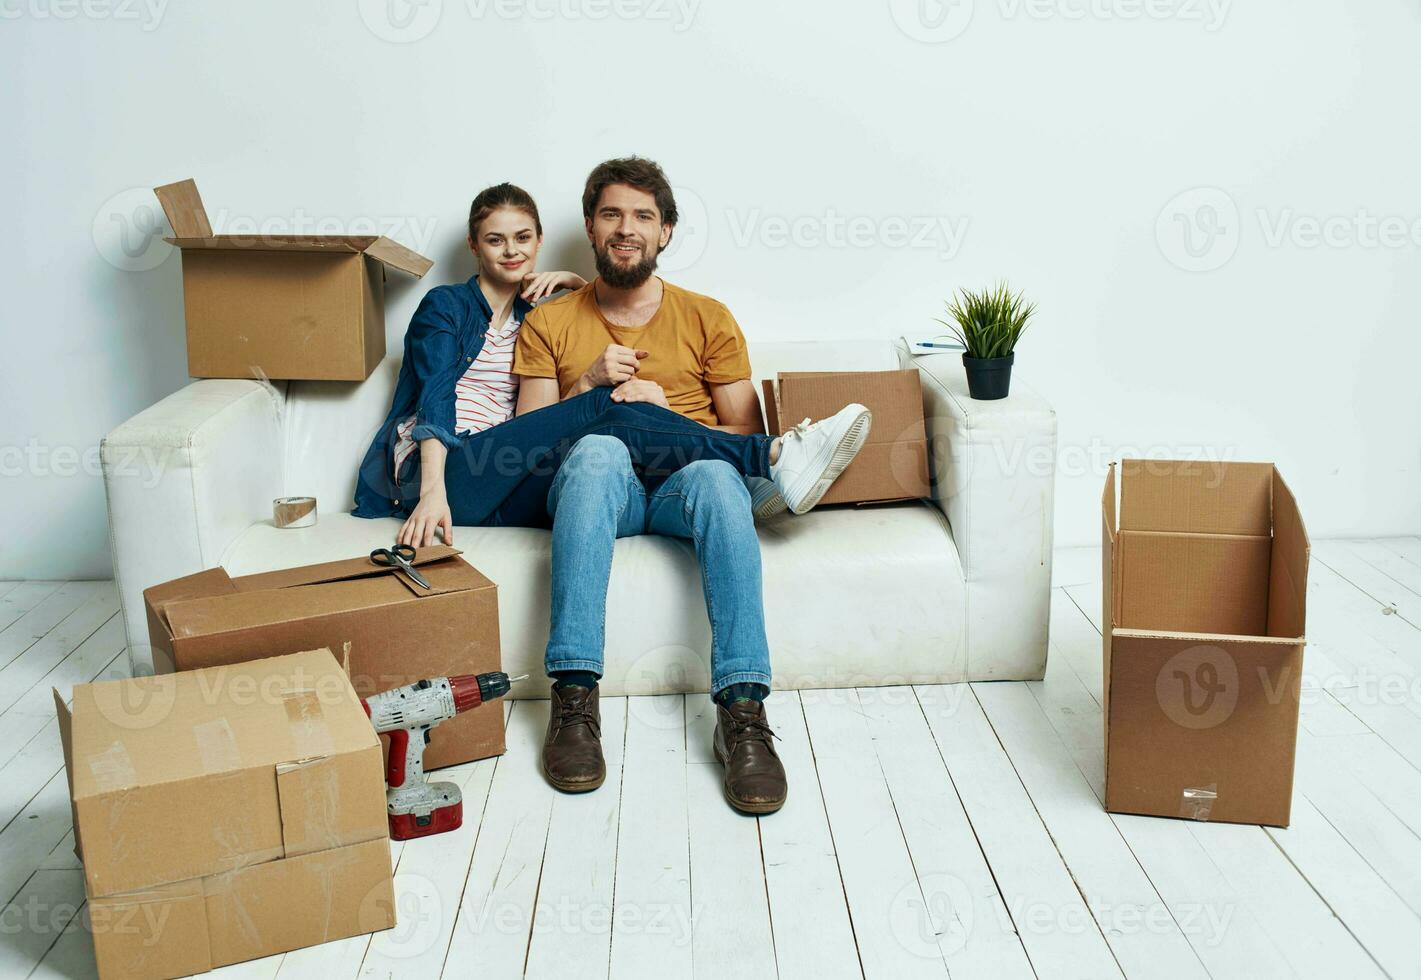 married couple in the apartment on the couch with boxes moving fun photo